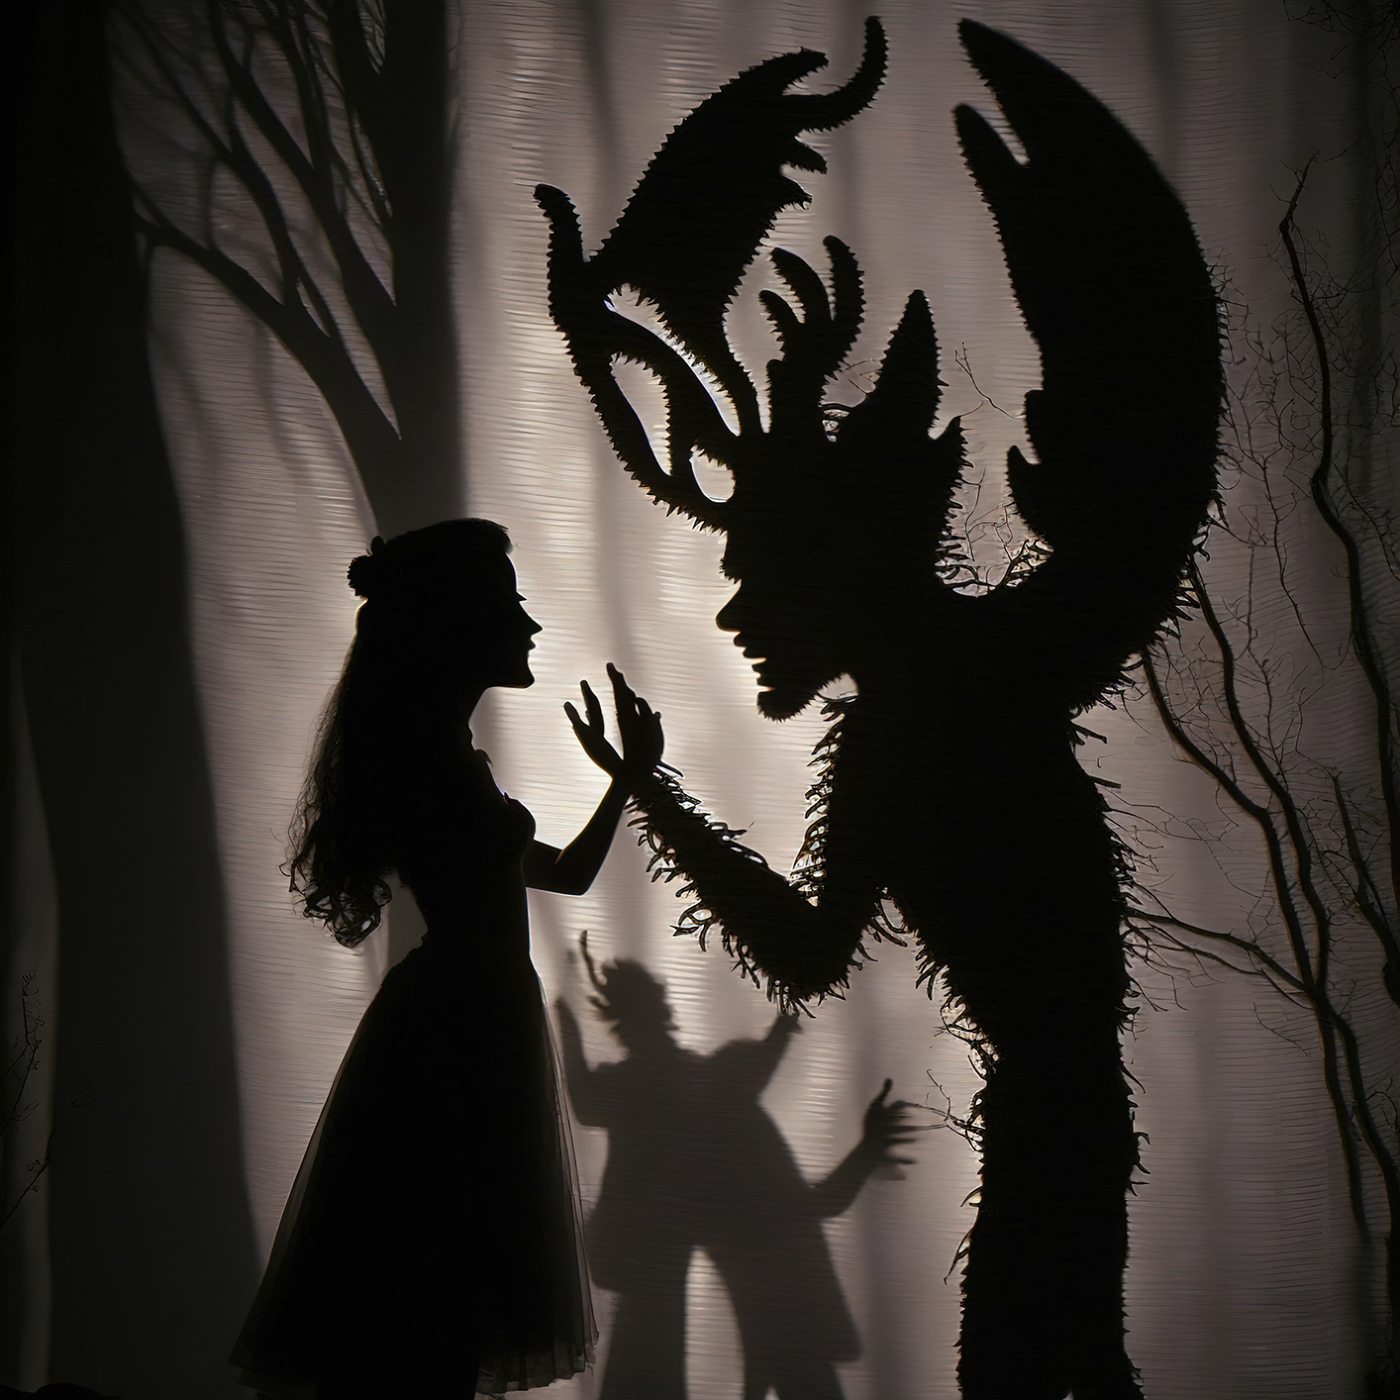 puppet shadow puppets